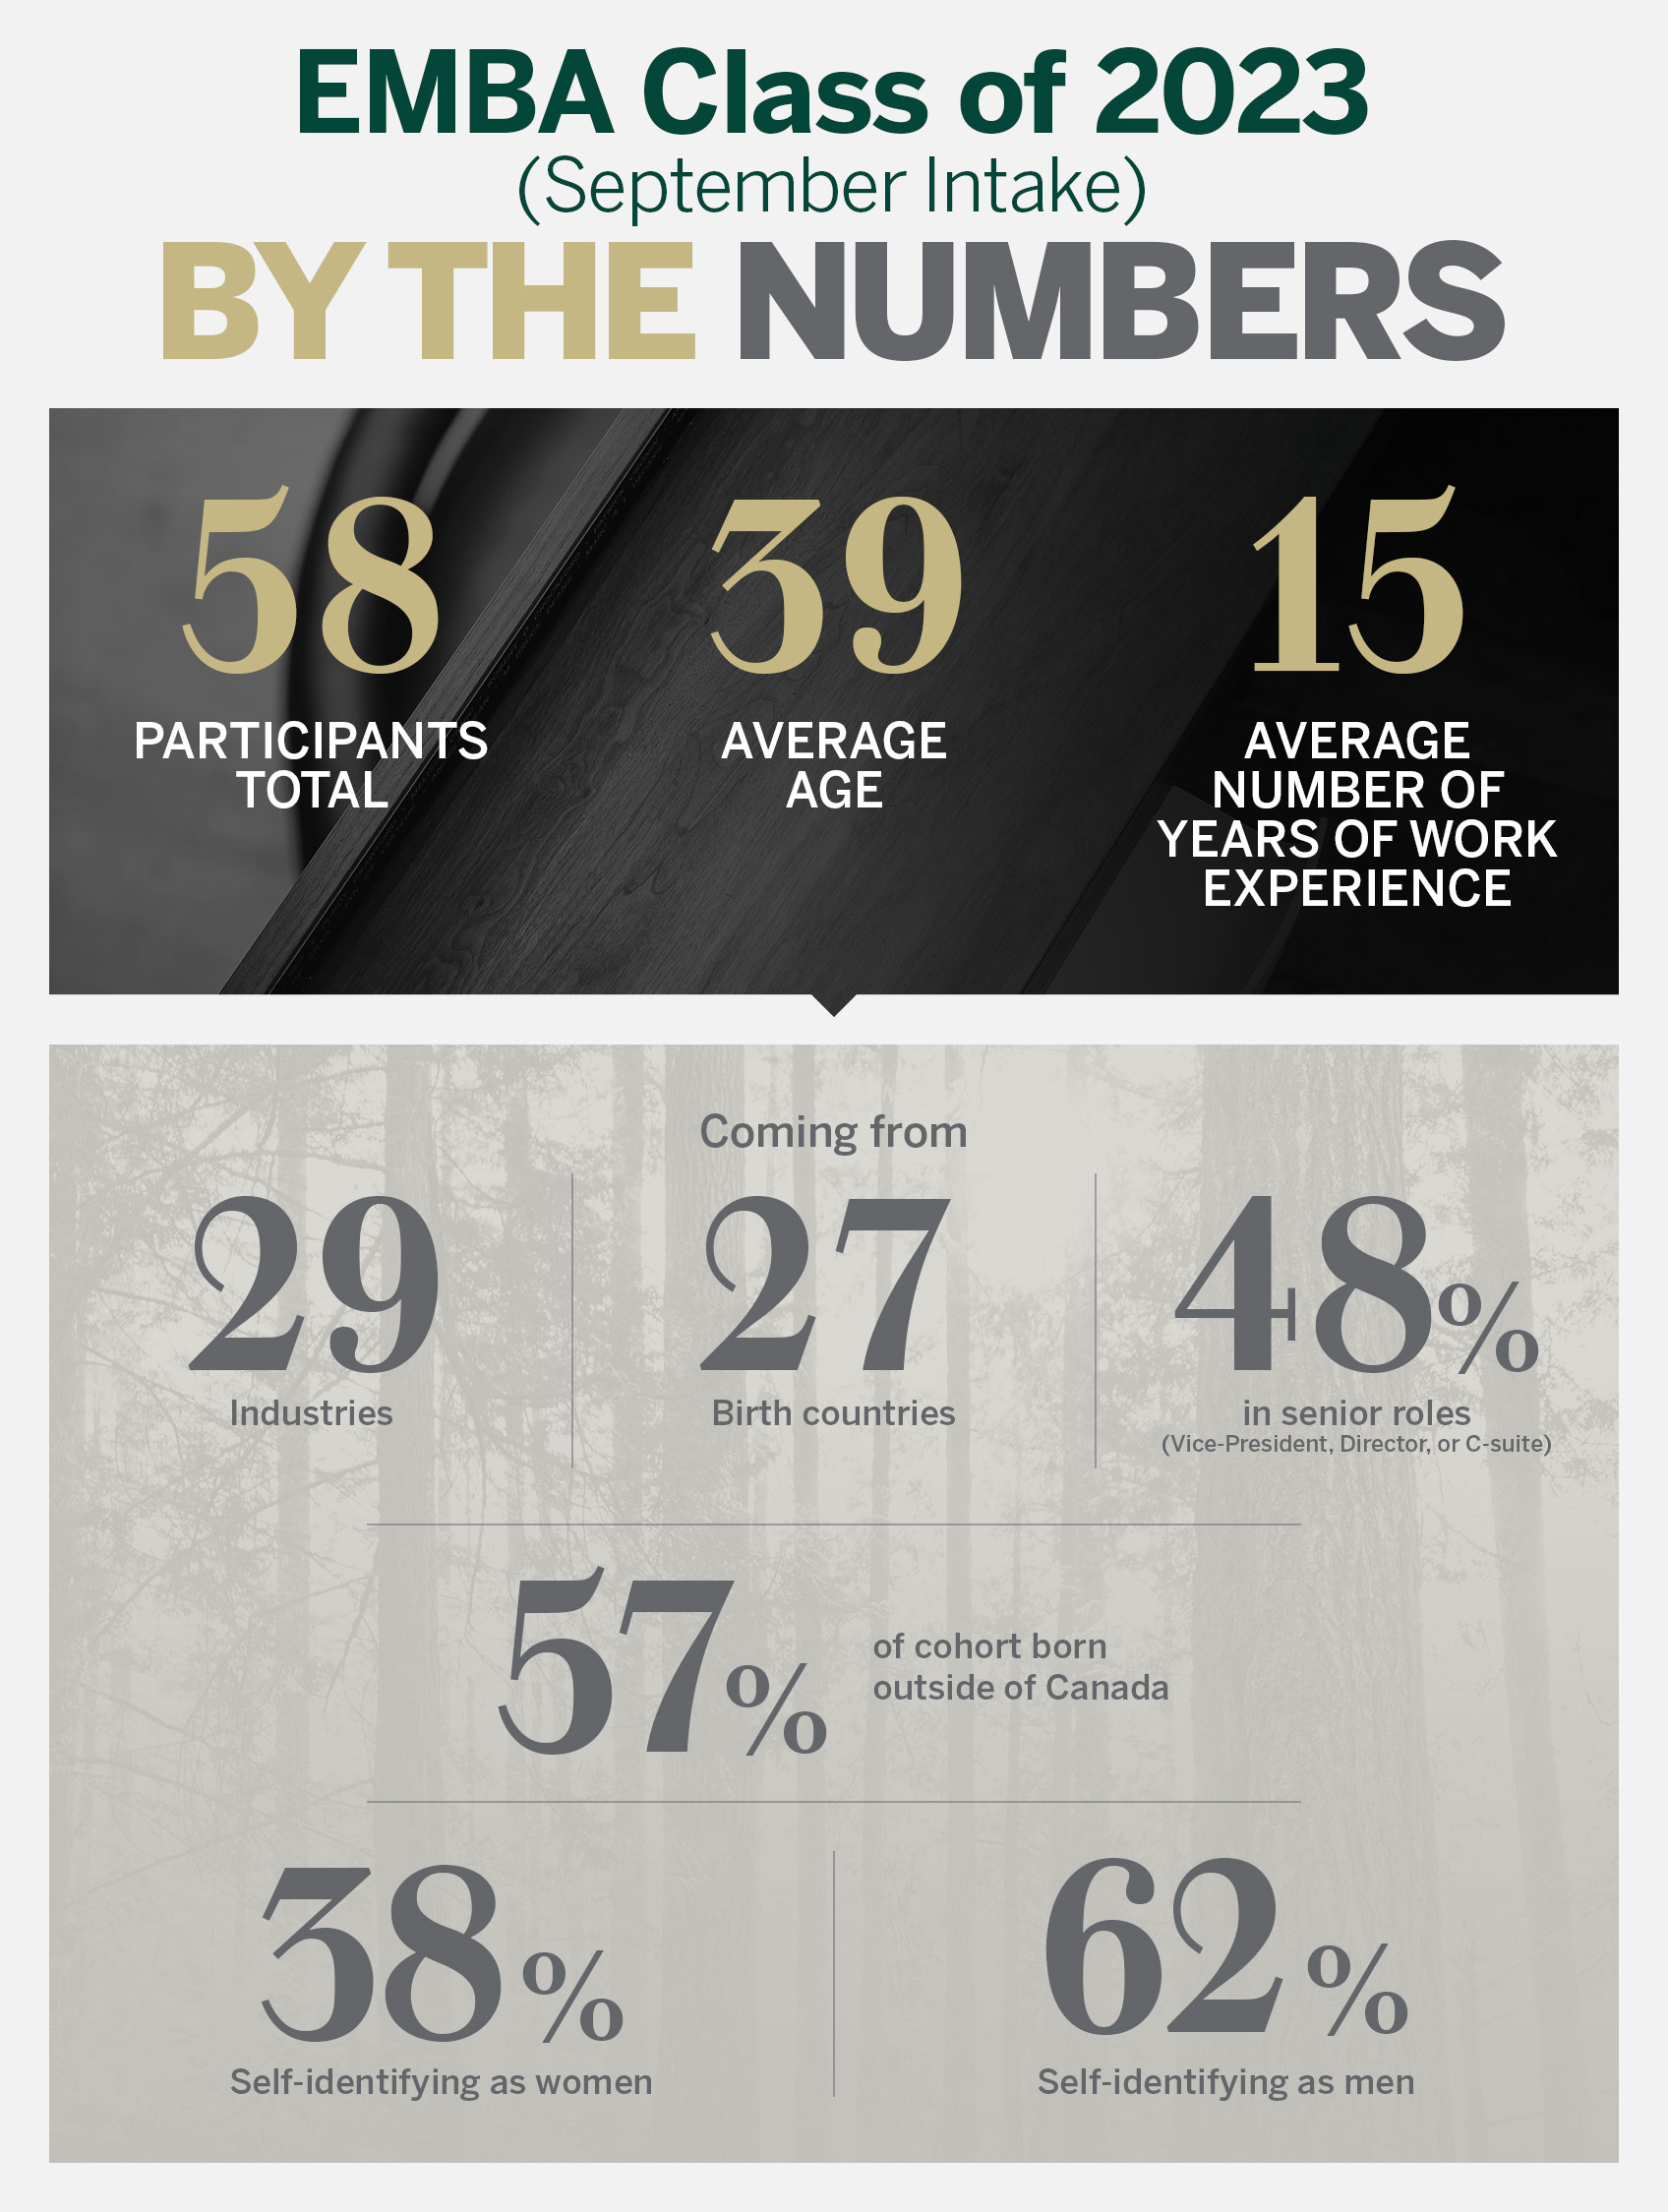 EMBA Class of 2023 (September Intake) By the Numbers